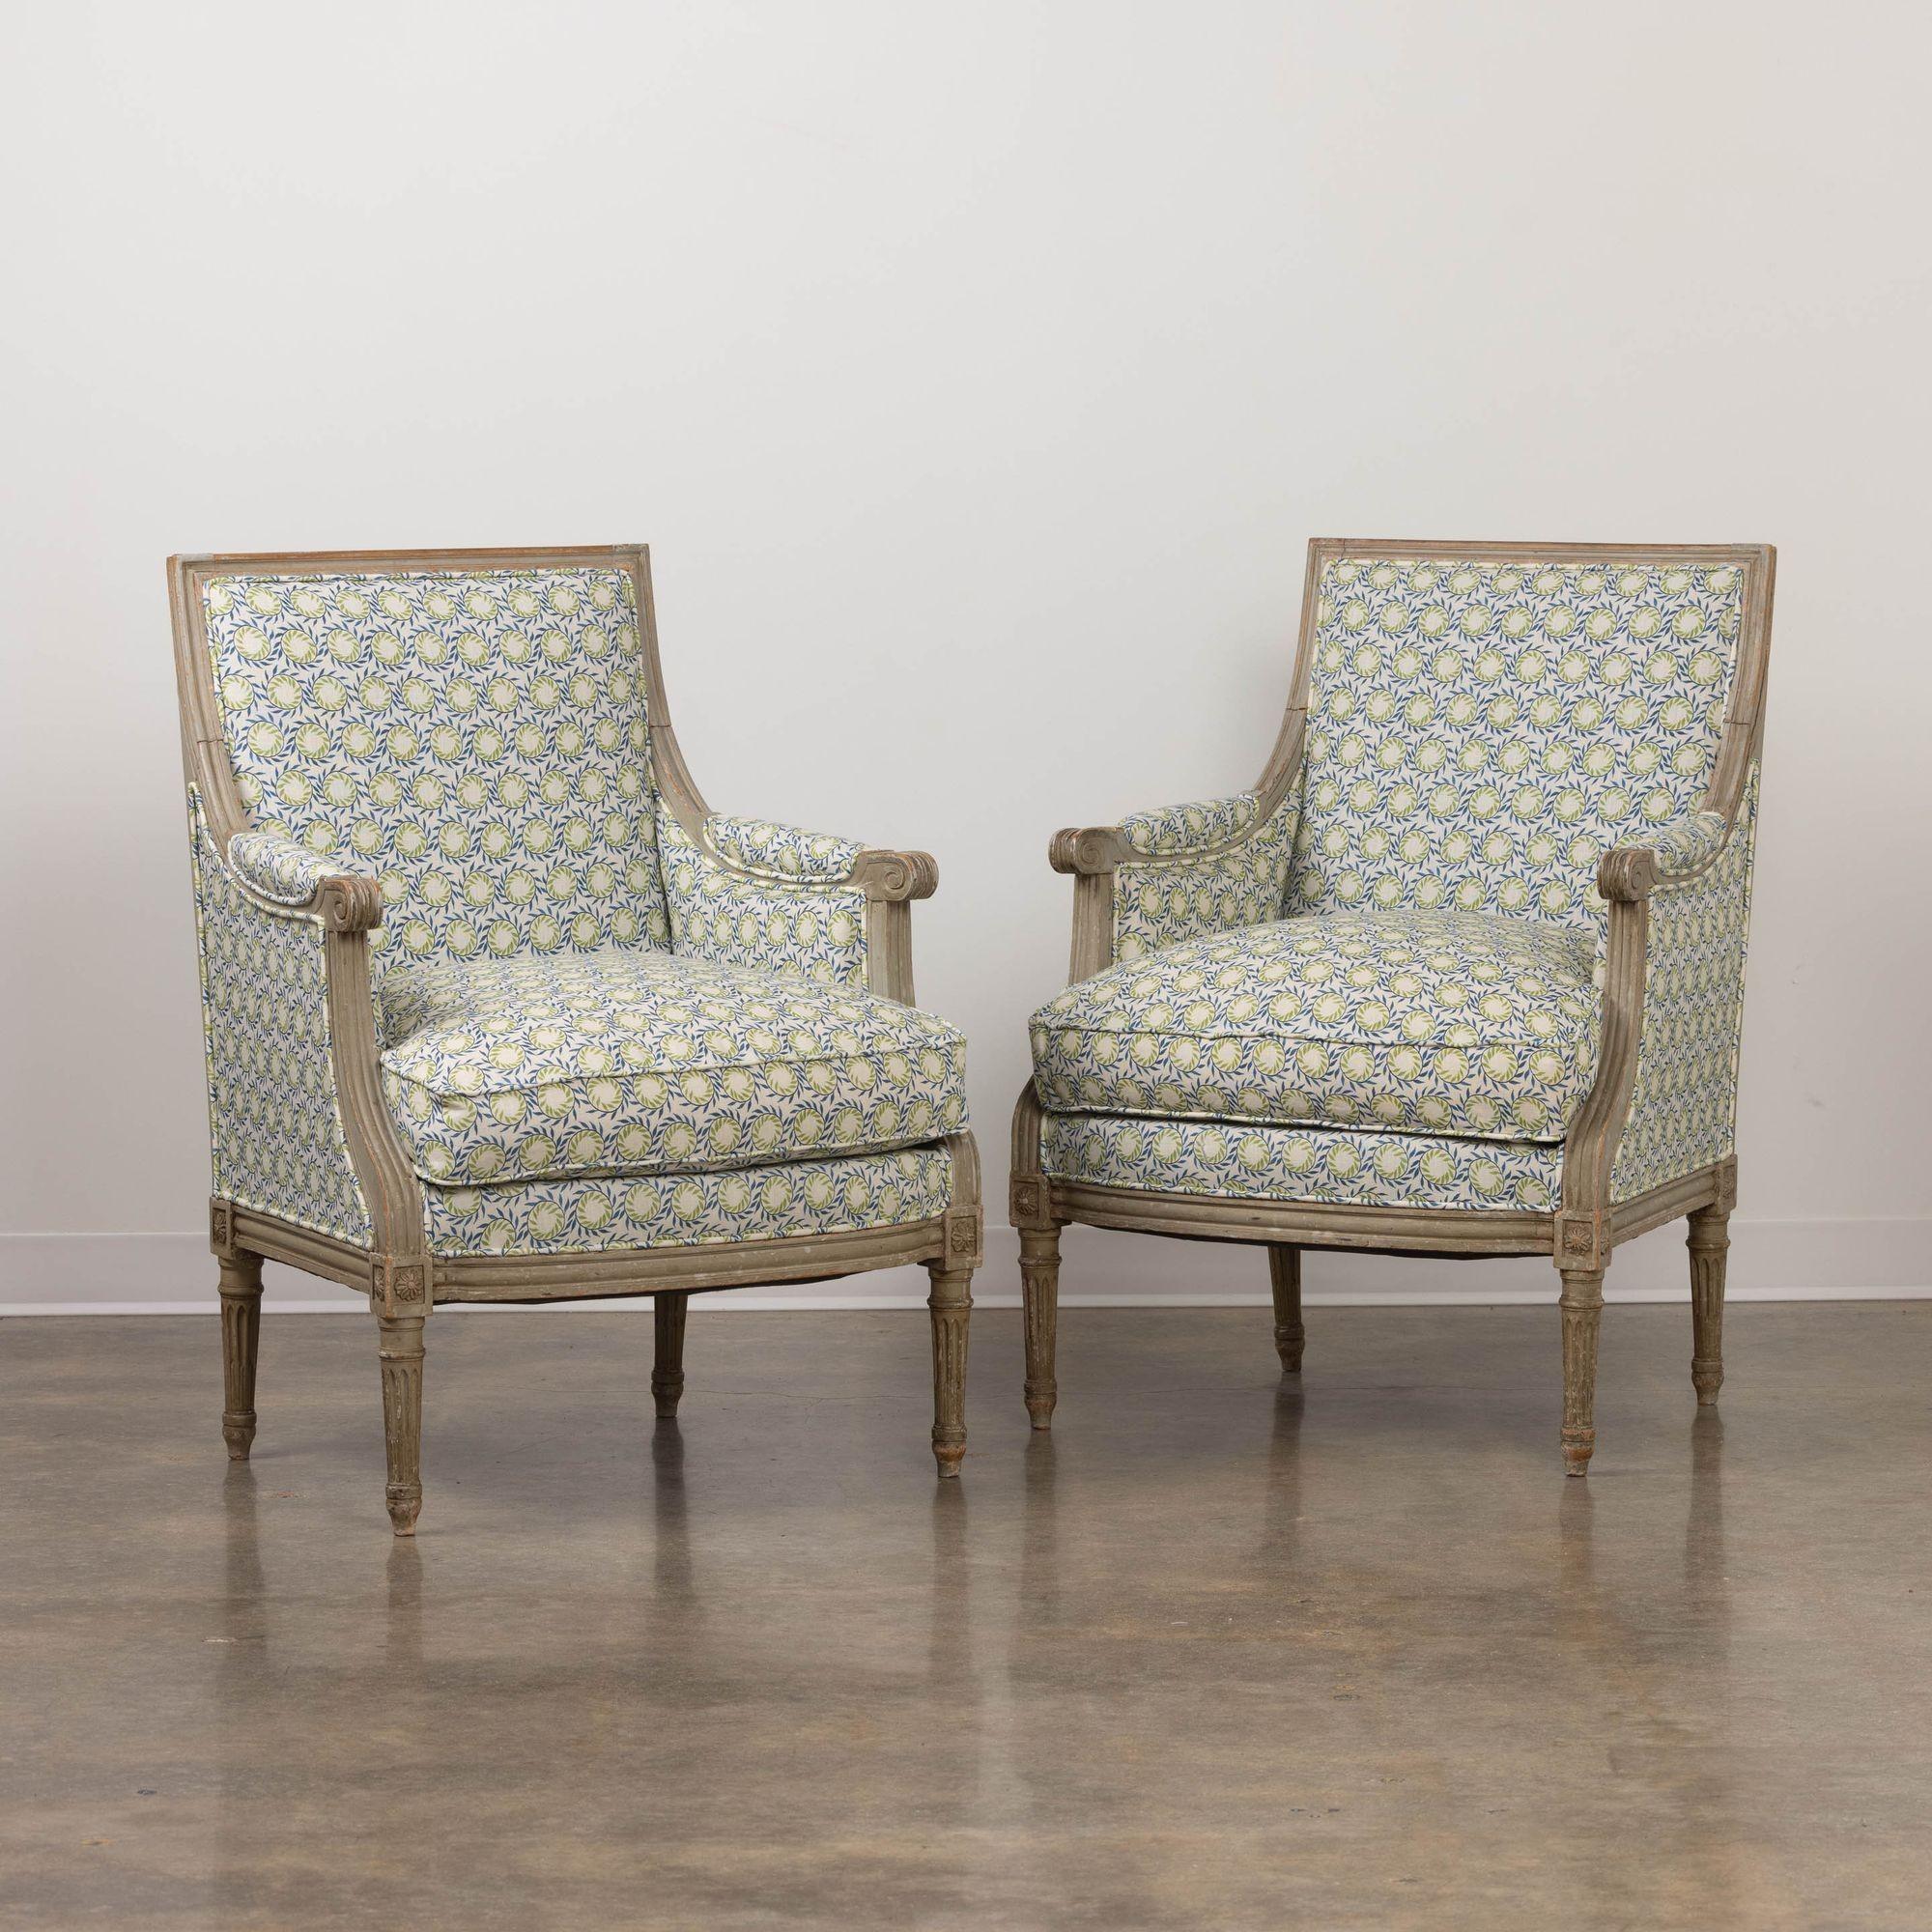 A pair of French Louis XVI style bergères in original paint from the 19th century. Rosettes on the corner posts with tapered and fluted legs. Newly upholstered in a smart blue and green fabric.  These beautiful chairs are very comfortable.